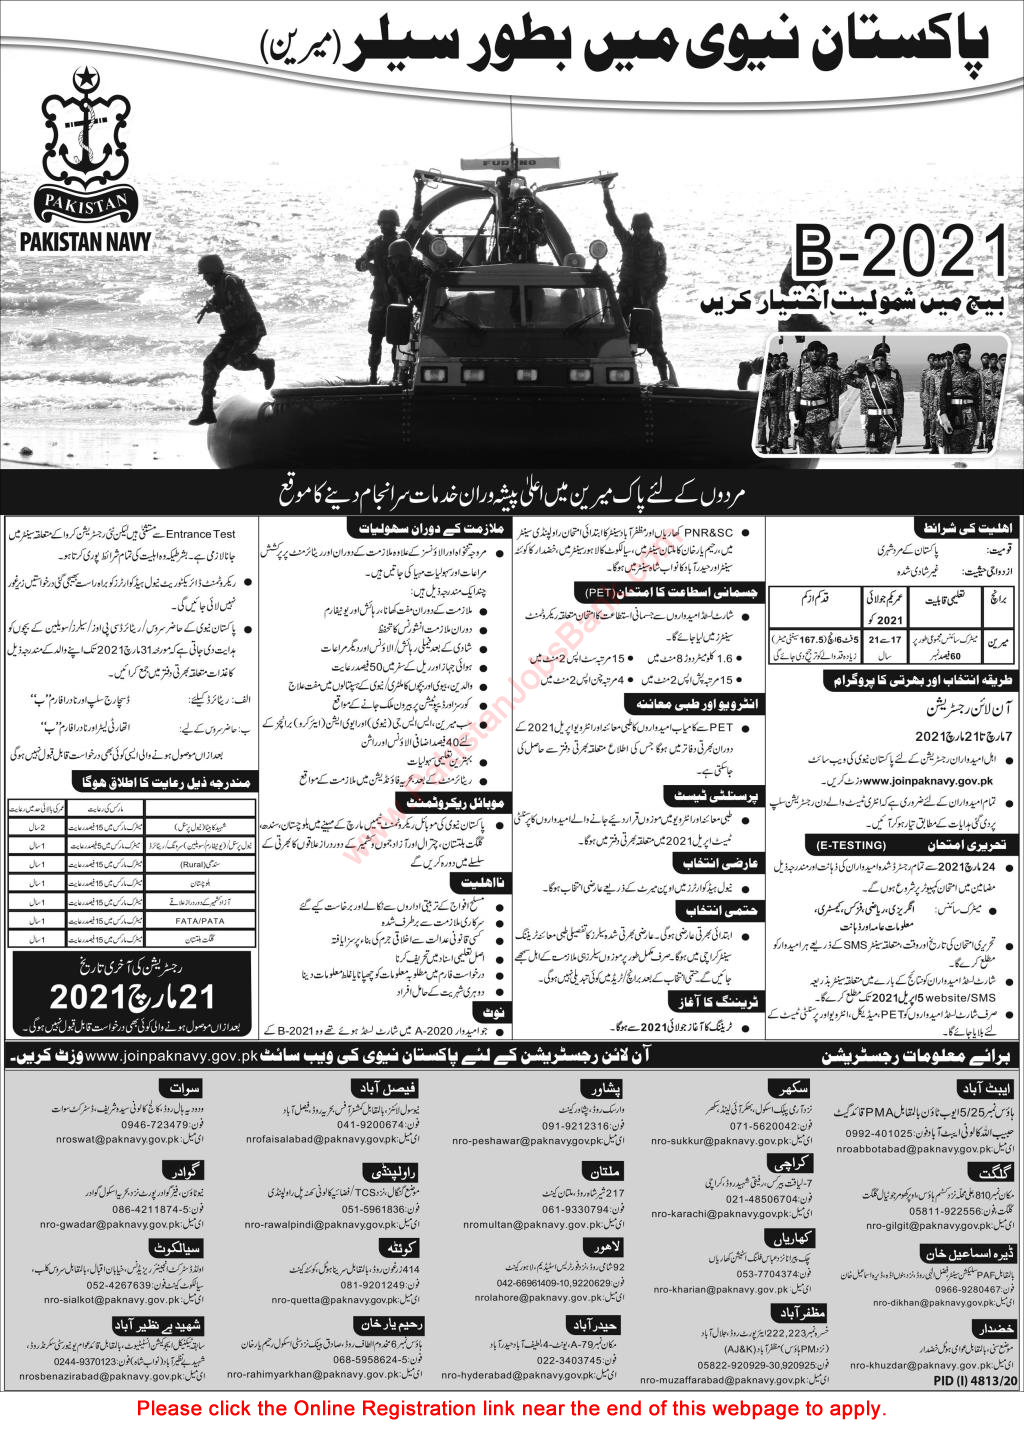 Join Pakistan Navy as Sailor 2021 March Online Registration Join in B-2021 Batch Latest